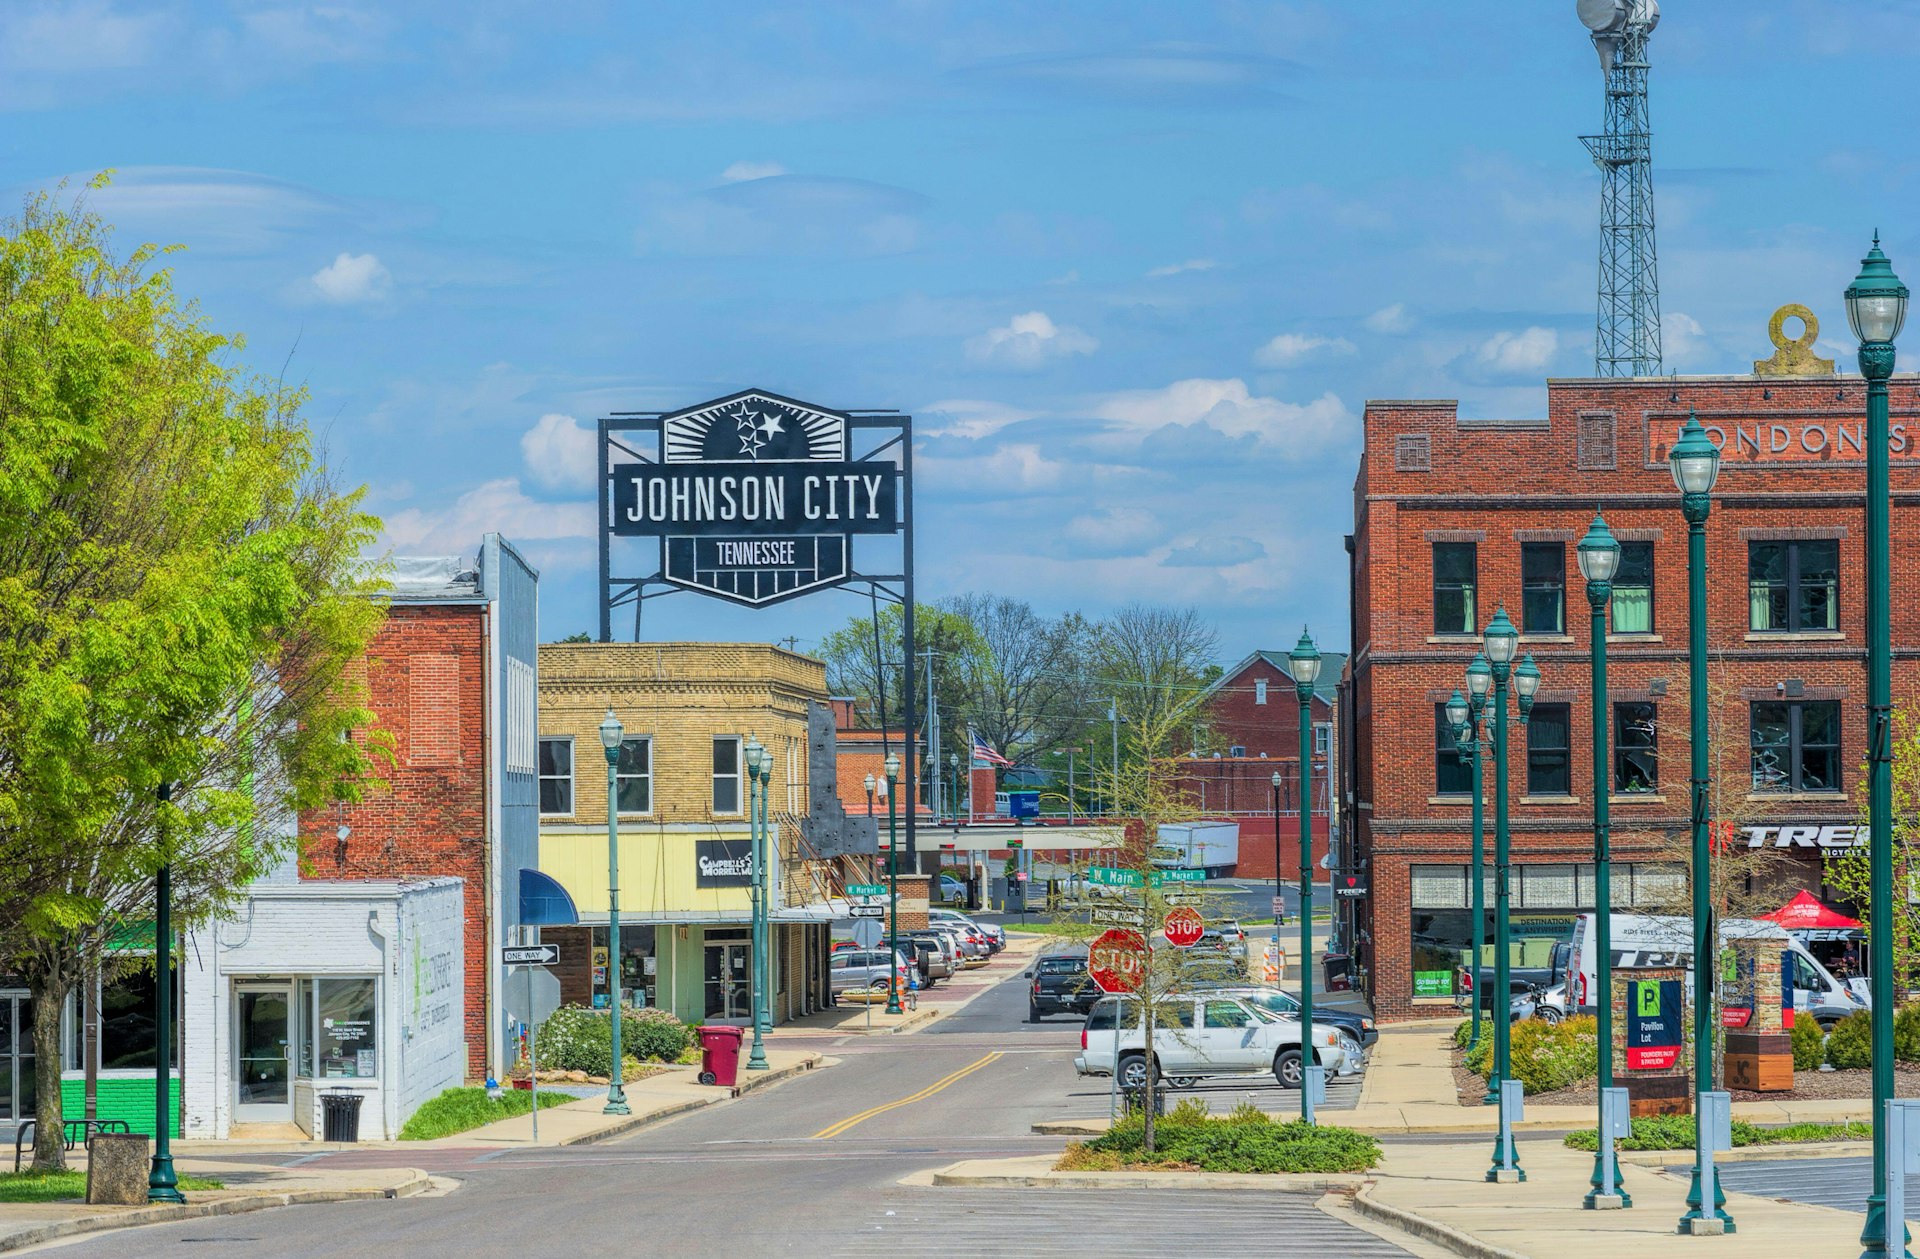 Quiet small-town streets with a sign reading "Johnson City Tennessee"